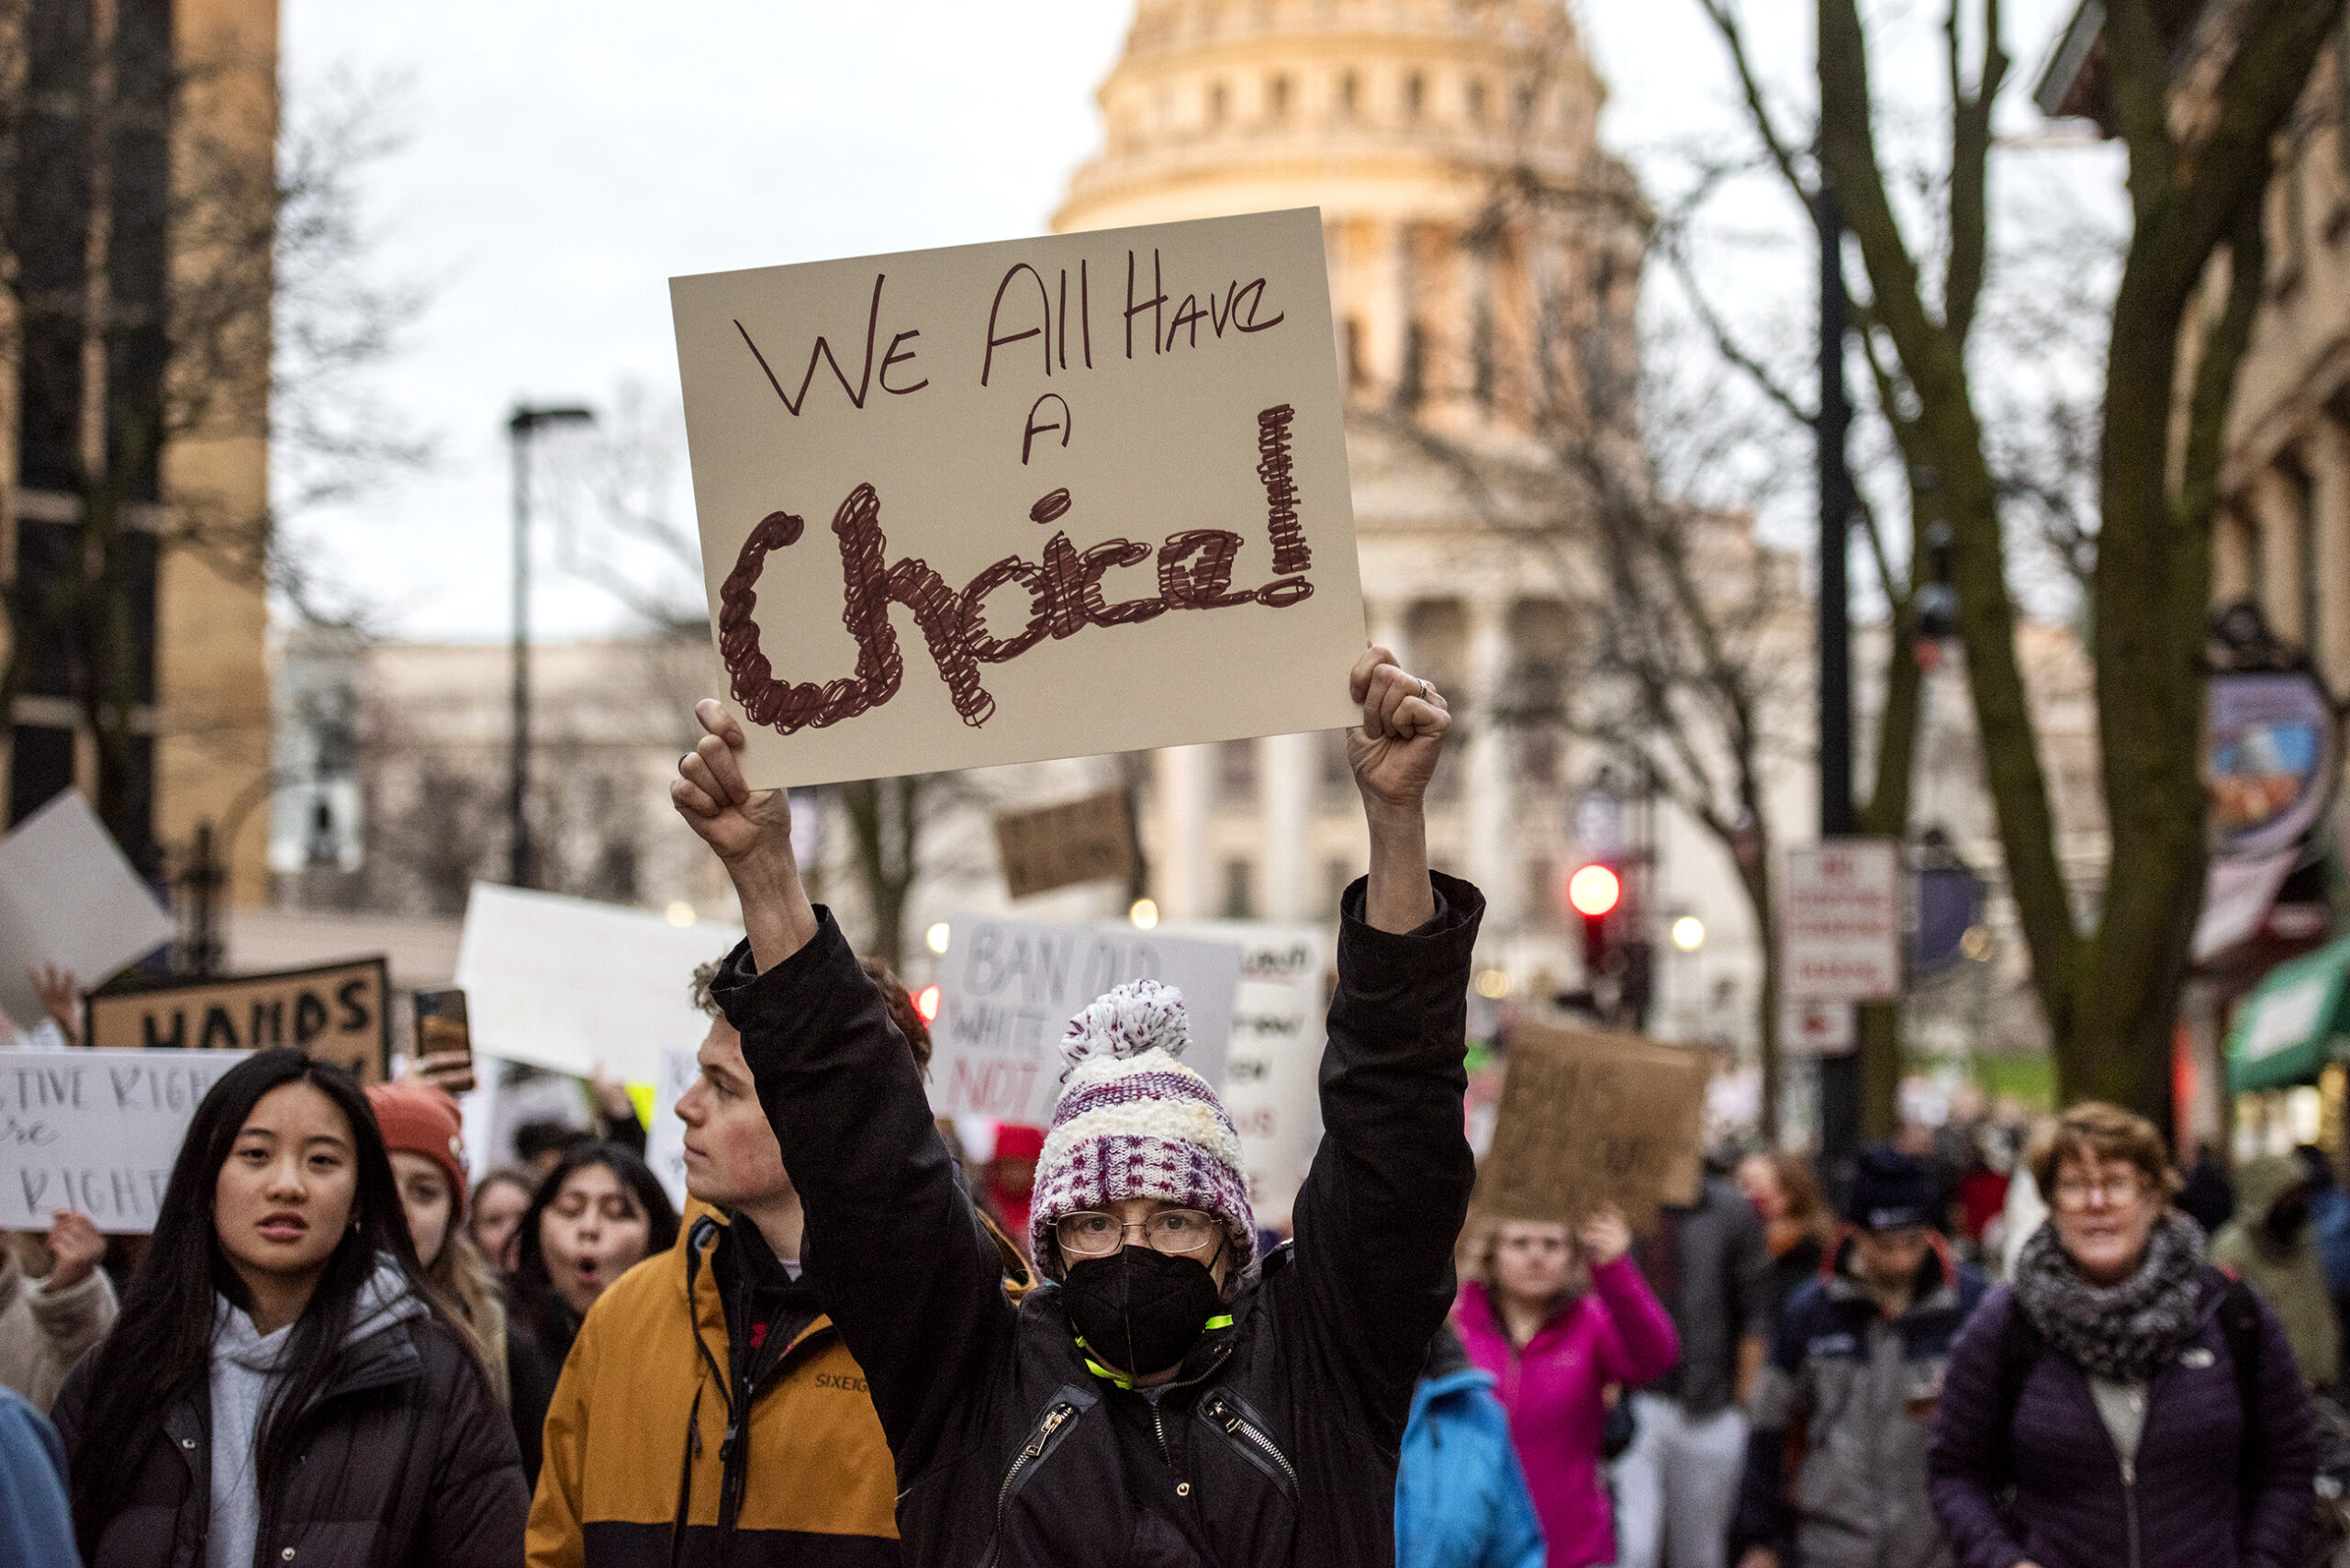 A protester's sign says "We all have a choice!" The Capitol can be seen behind them.